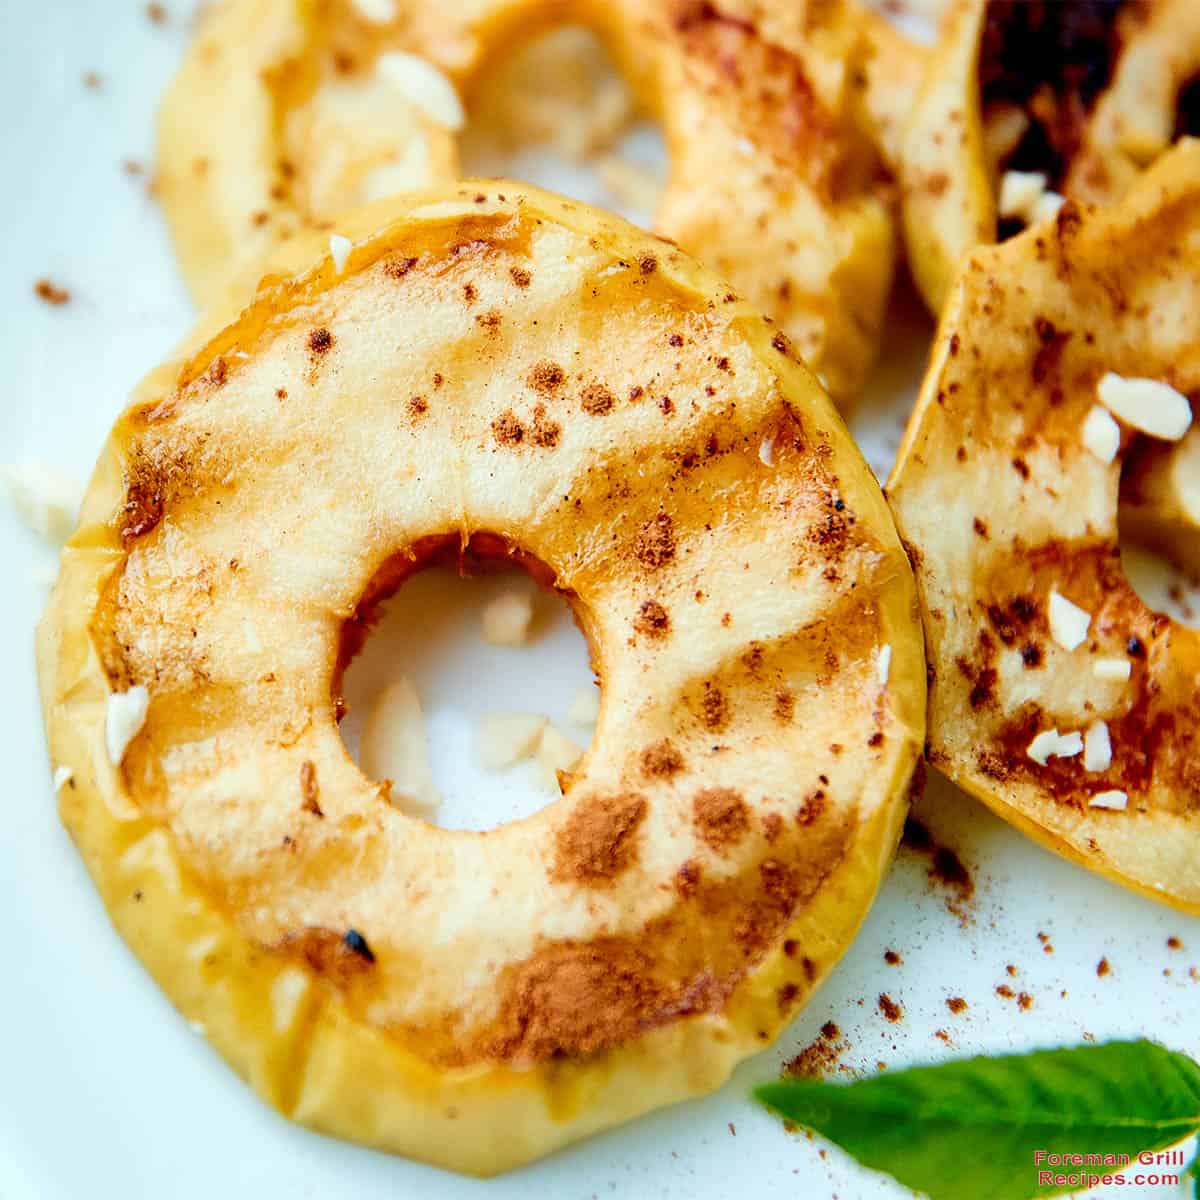 Grilled Apple Slices with Toppings Recipe